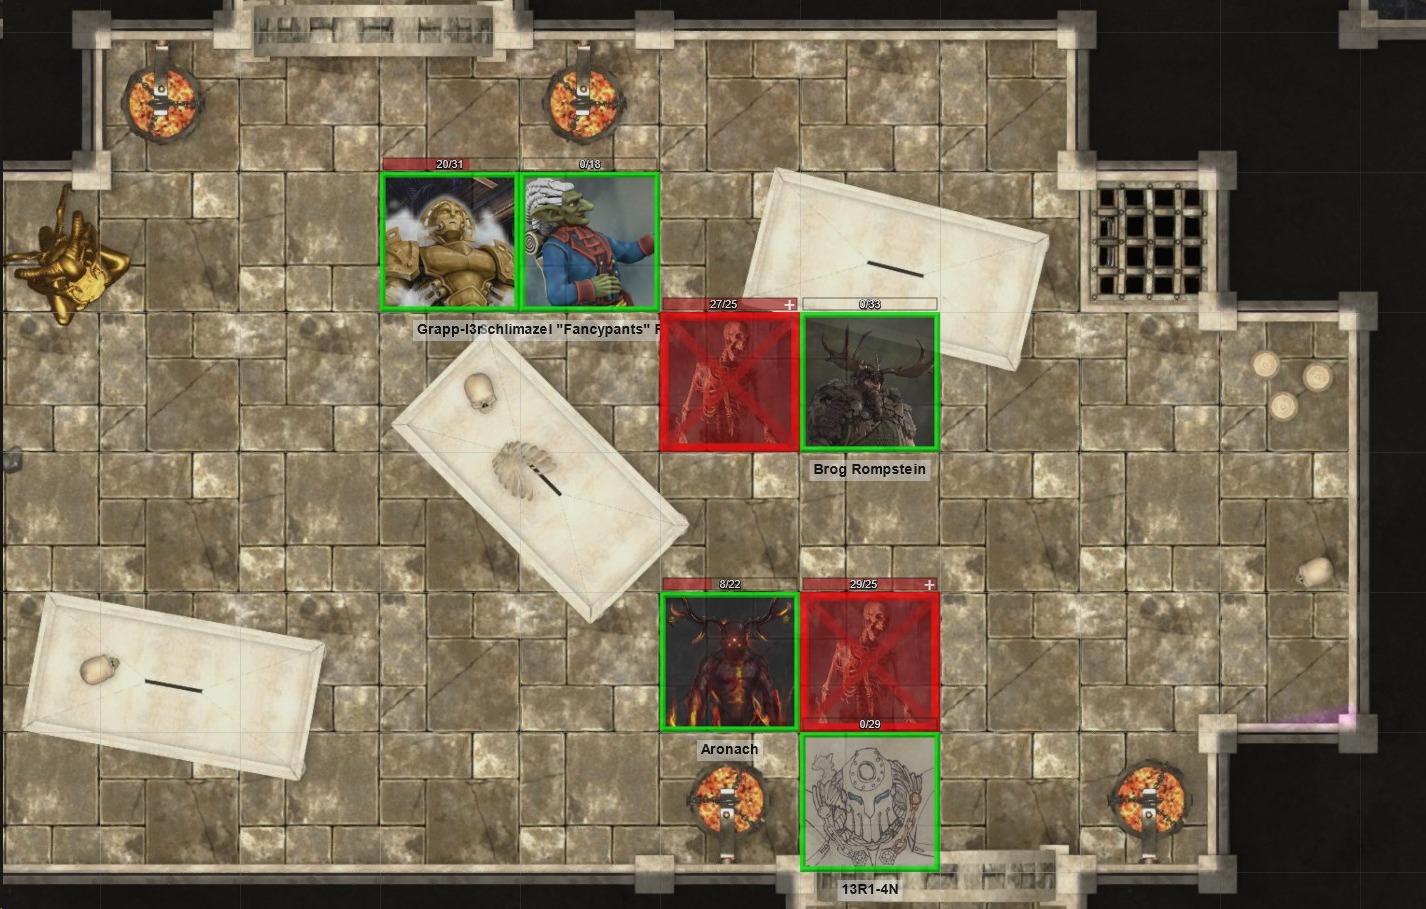 The first combat of the session was against some Boneguards in the mortuary.